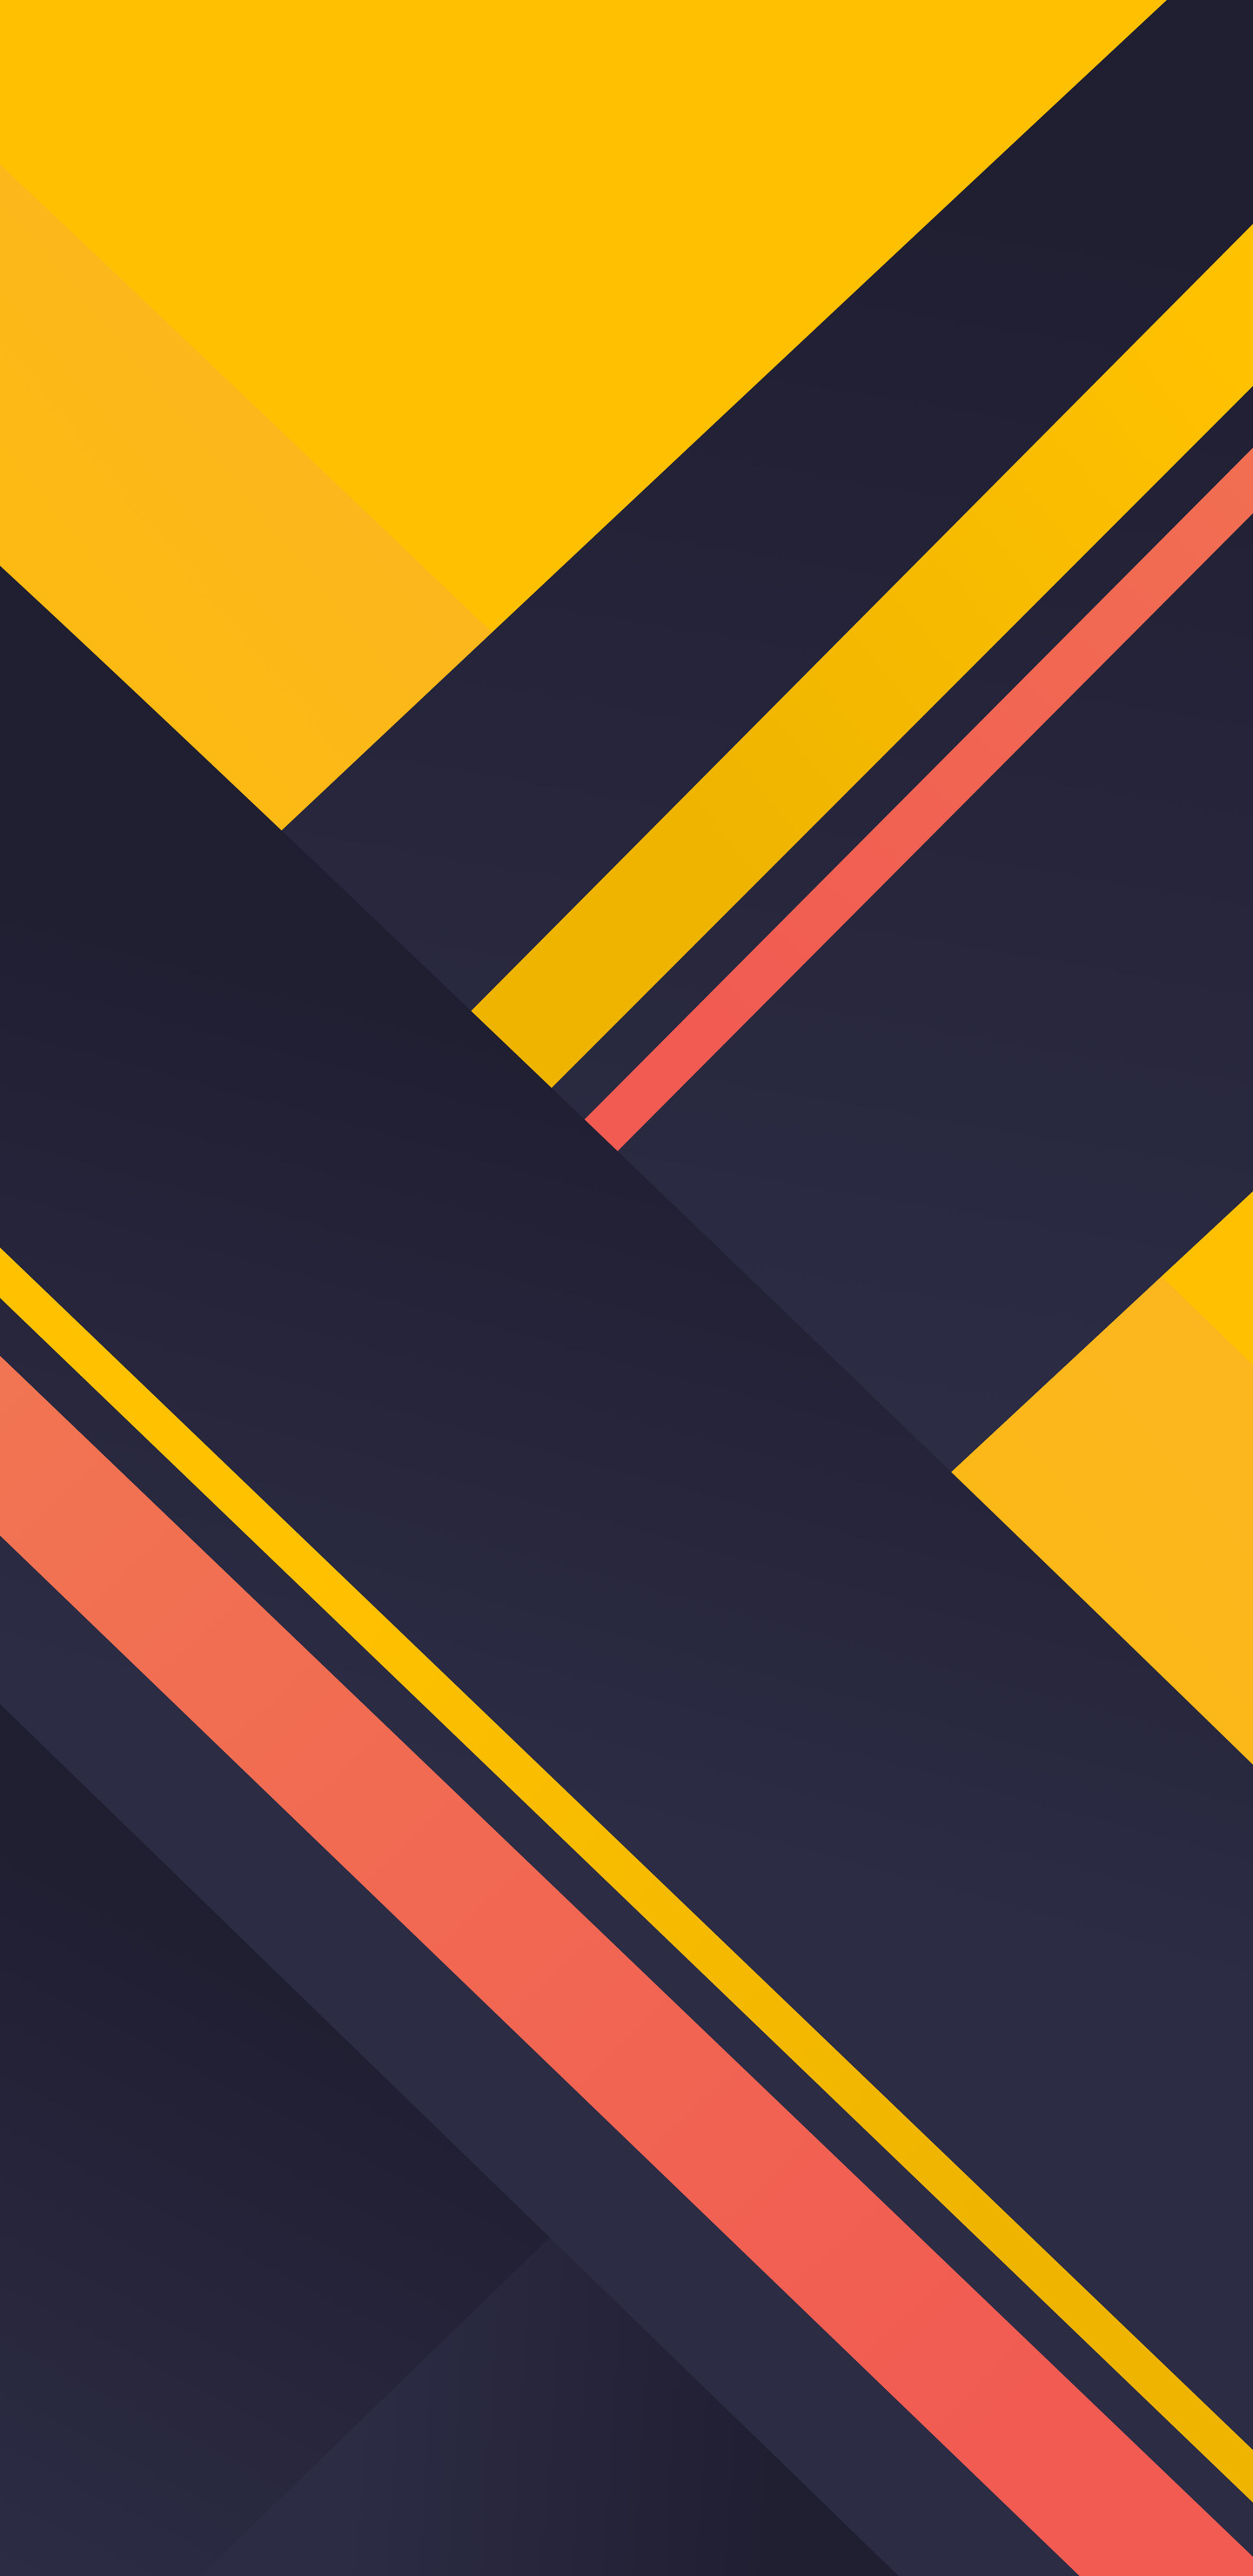 1440x2960 Geometric Material Yellow Blue Red 4k Samsung Galaxy Note 9,8,  S9,S8,S8+ QHD HD 4k Wallpapers, Images, Backgrounds, Photos and Pictures